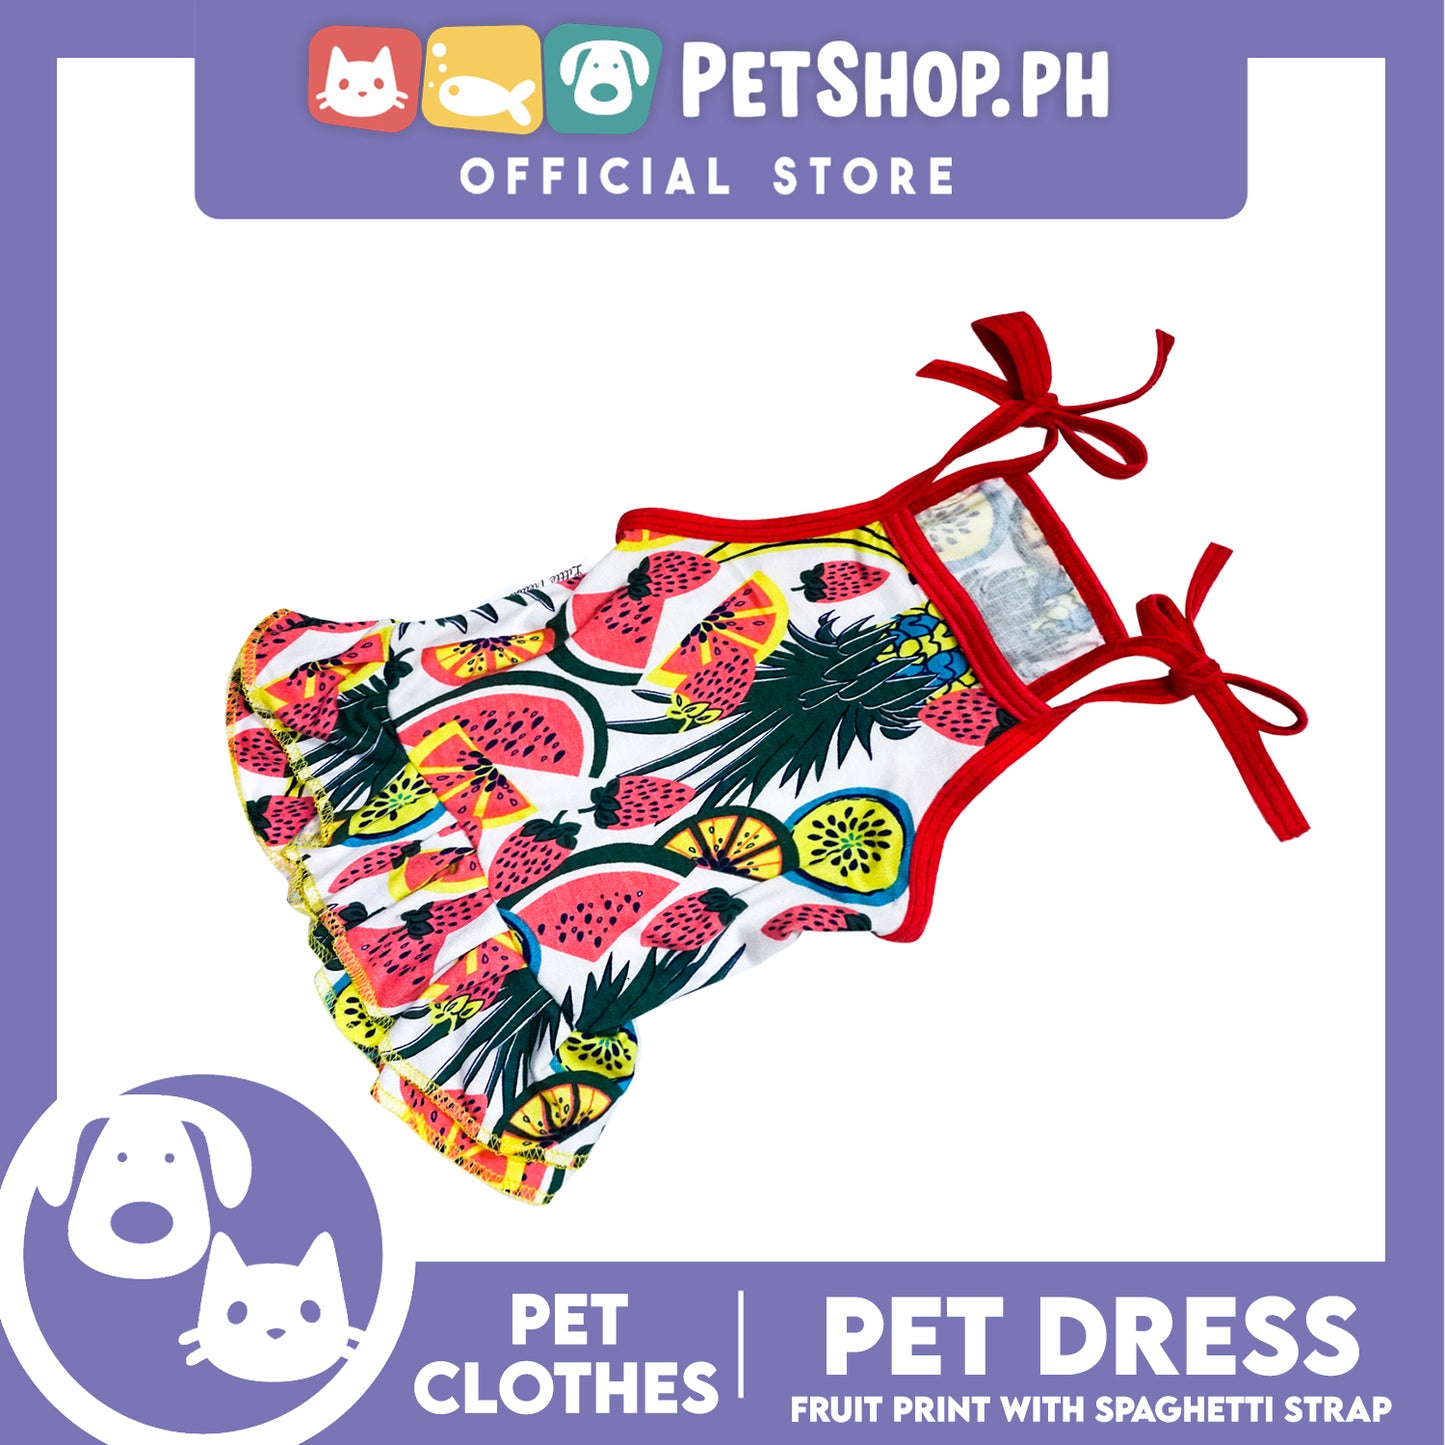 Pet Dress Fruit Print with Spaghetti Strap (Extra Large) Pet Dress Clothes Perfect for Dogs